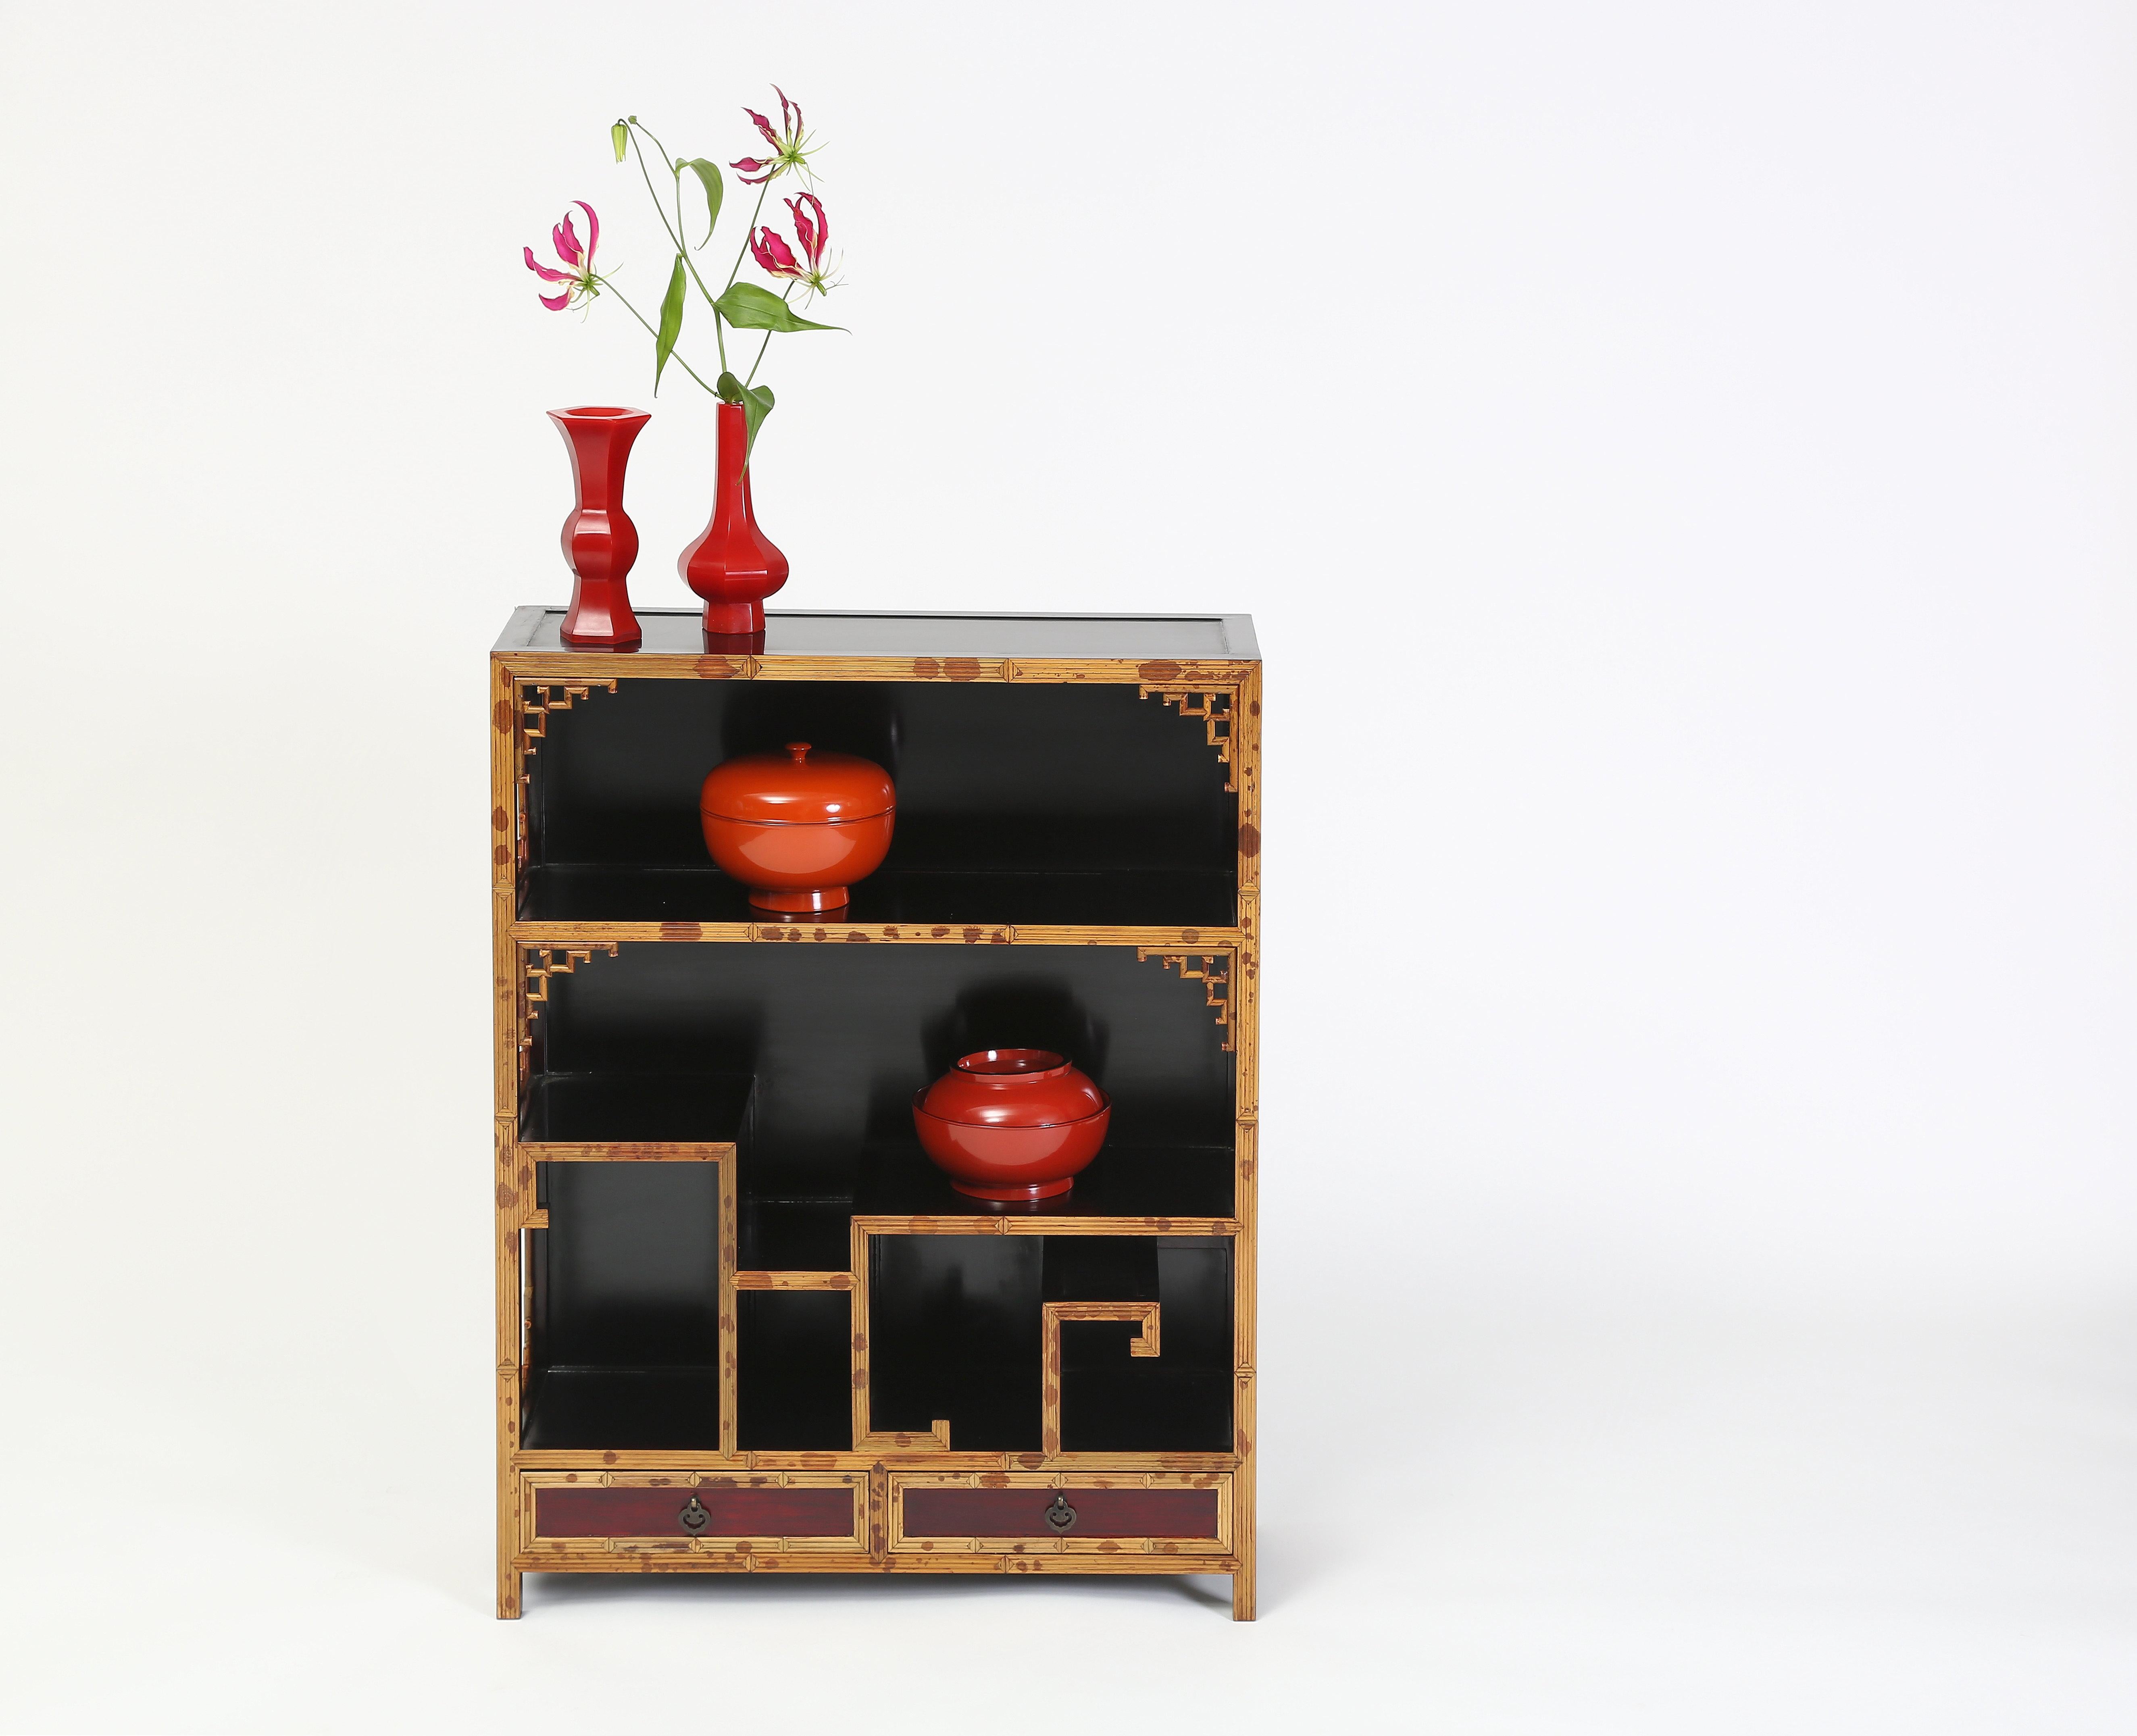 The chinoiserie shelves cabinet handcrafted in spotted bamboo and black lacquered hard wood featuring curio shelves with a back atop a row of two bottom drawers is ideal for displaying objects of arts
Measures: 26